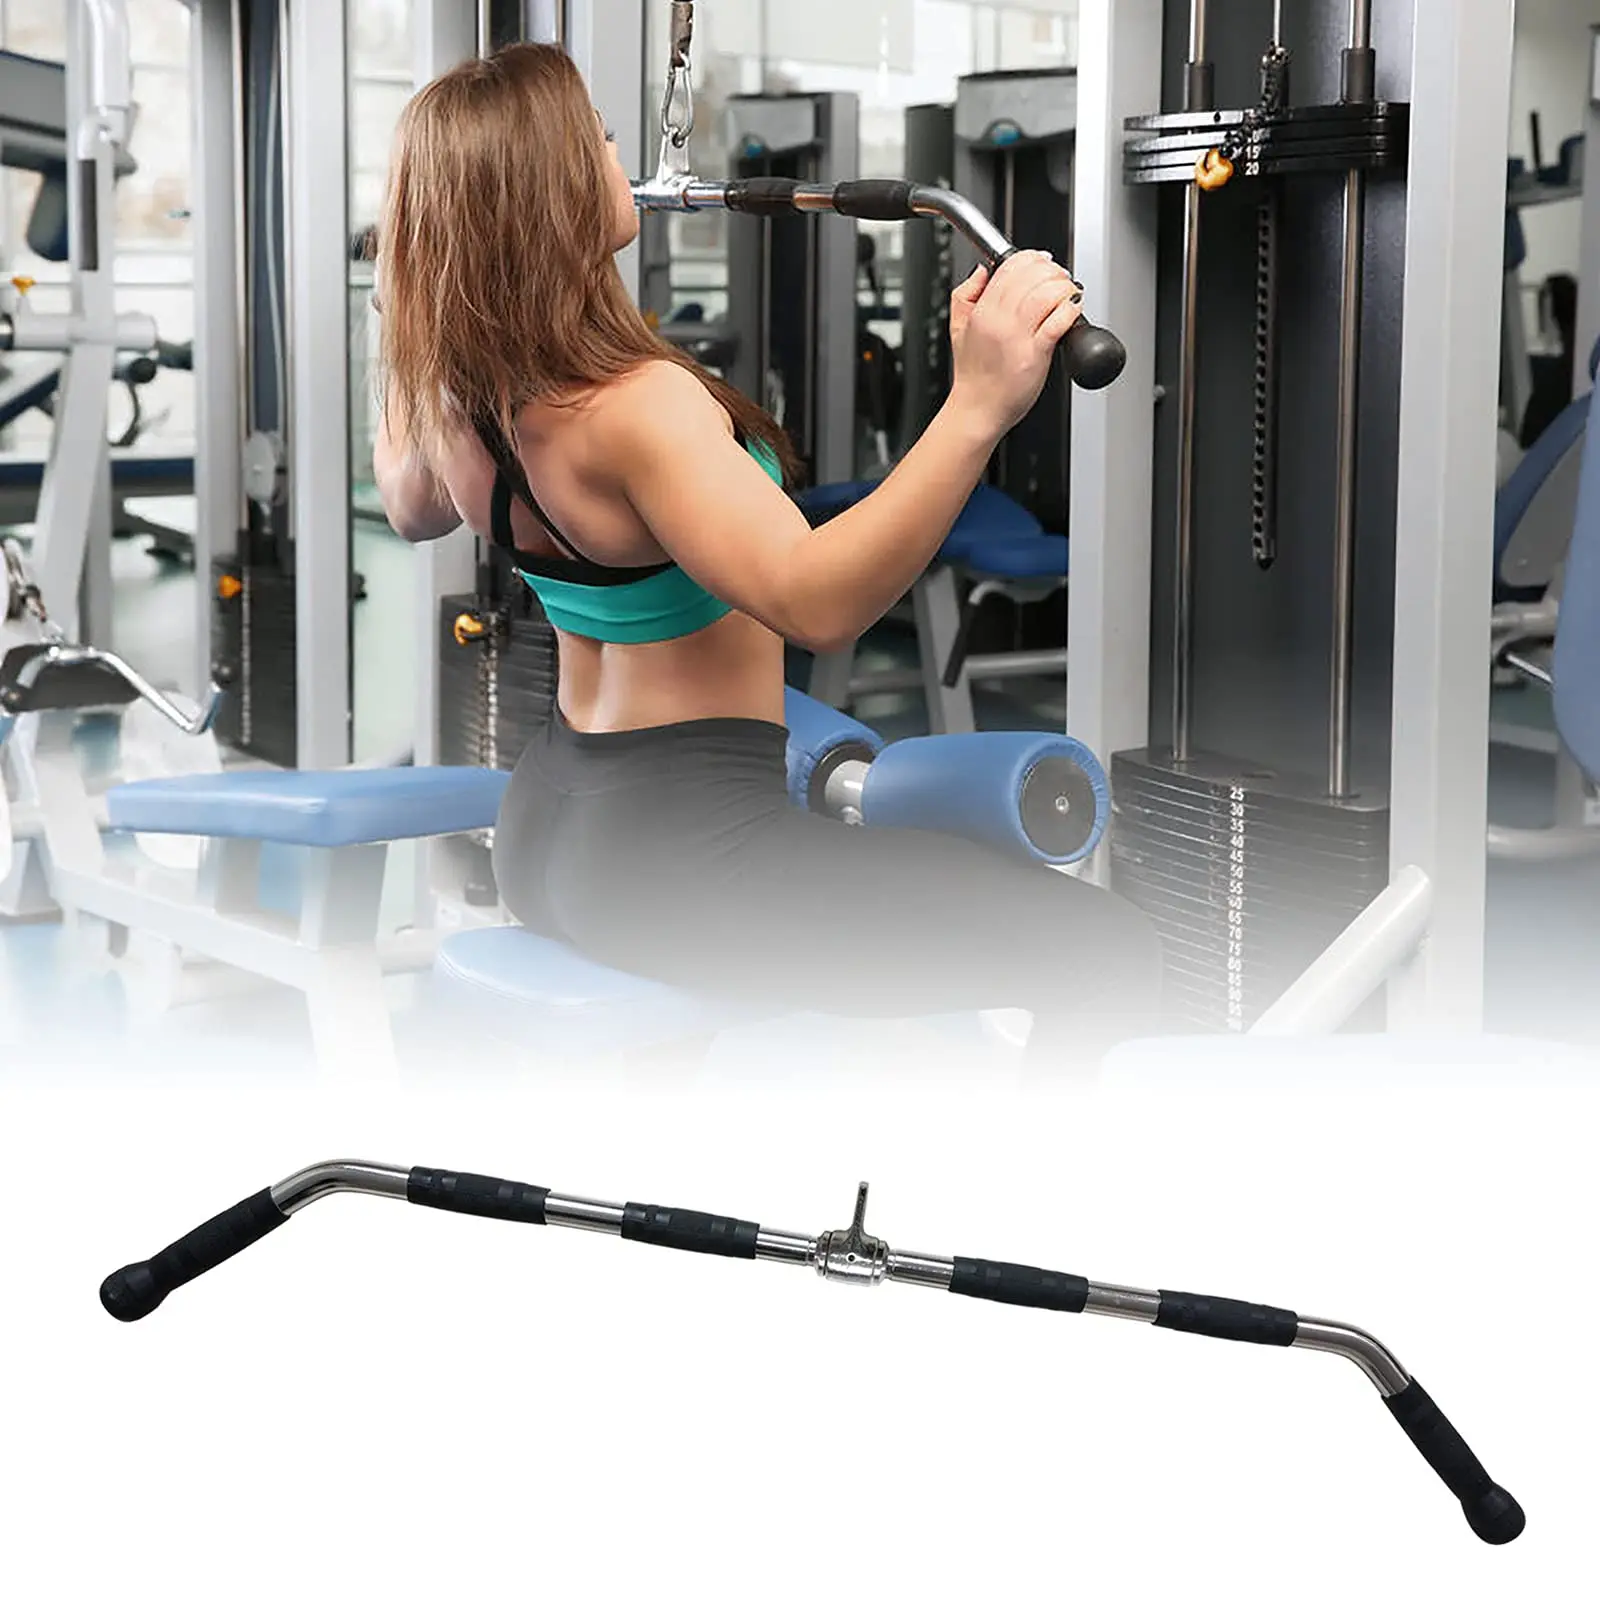 

V/T-shaped Fitness Home Lat Pull Down Grip Equipment Handles Muscle Workout Rowing Accessories Gym Cable Machine Attachments